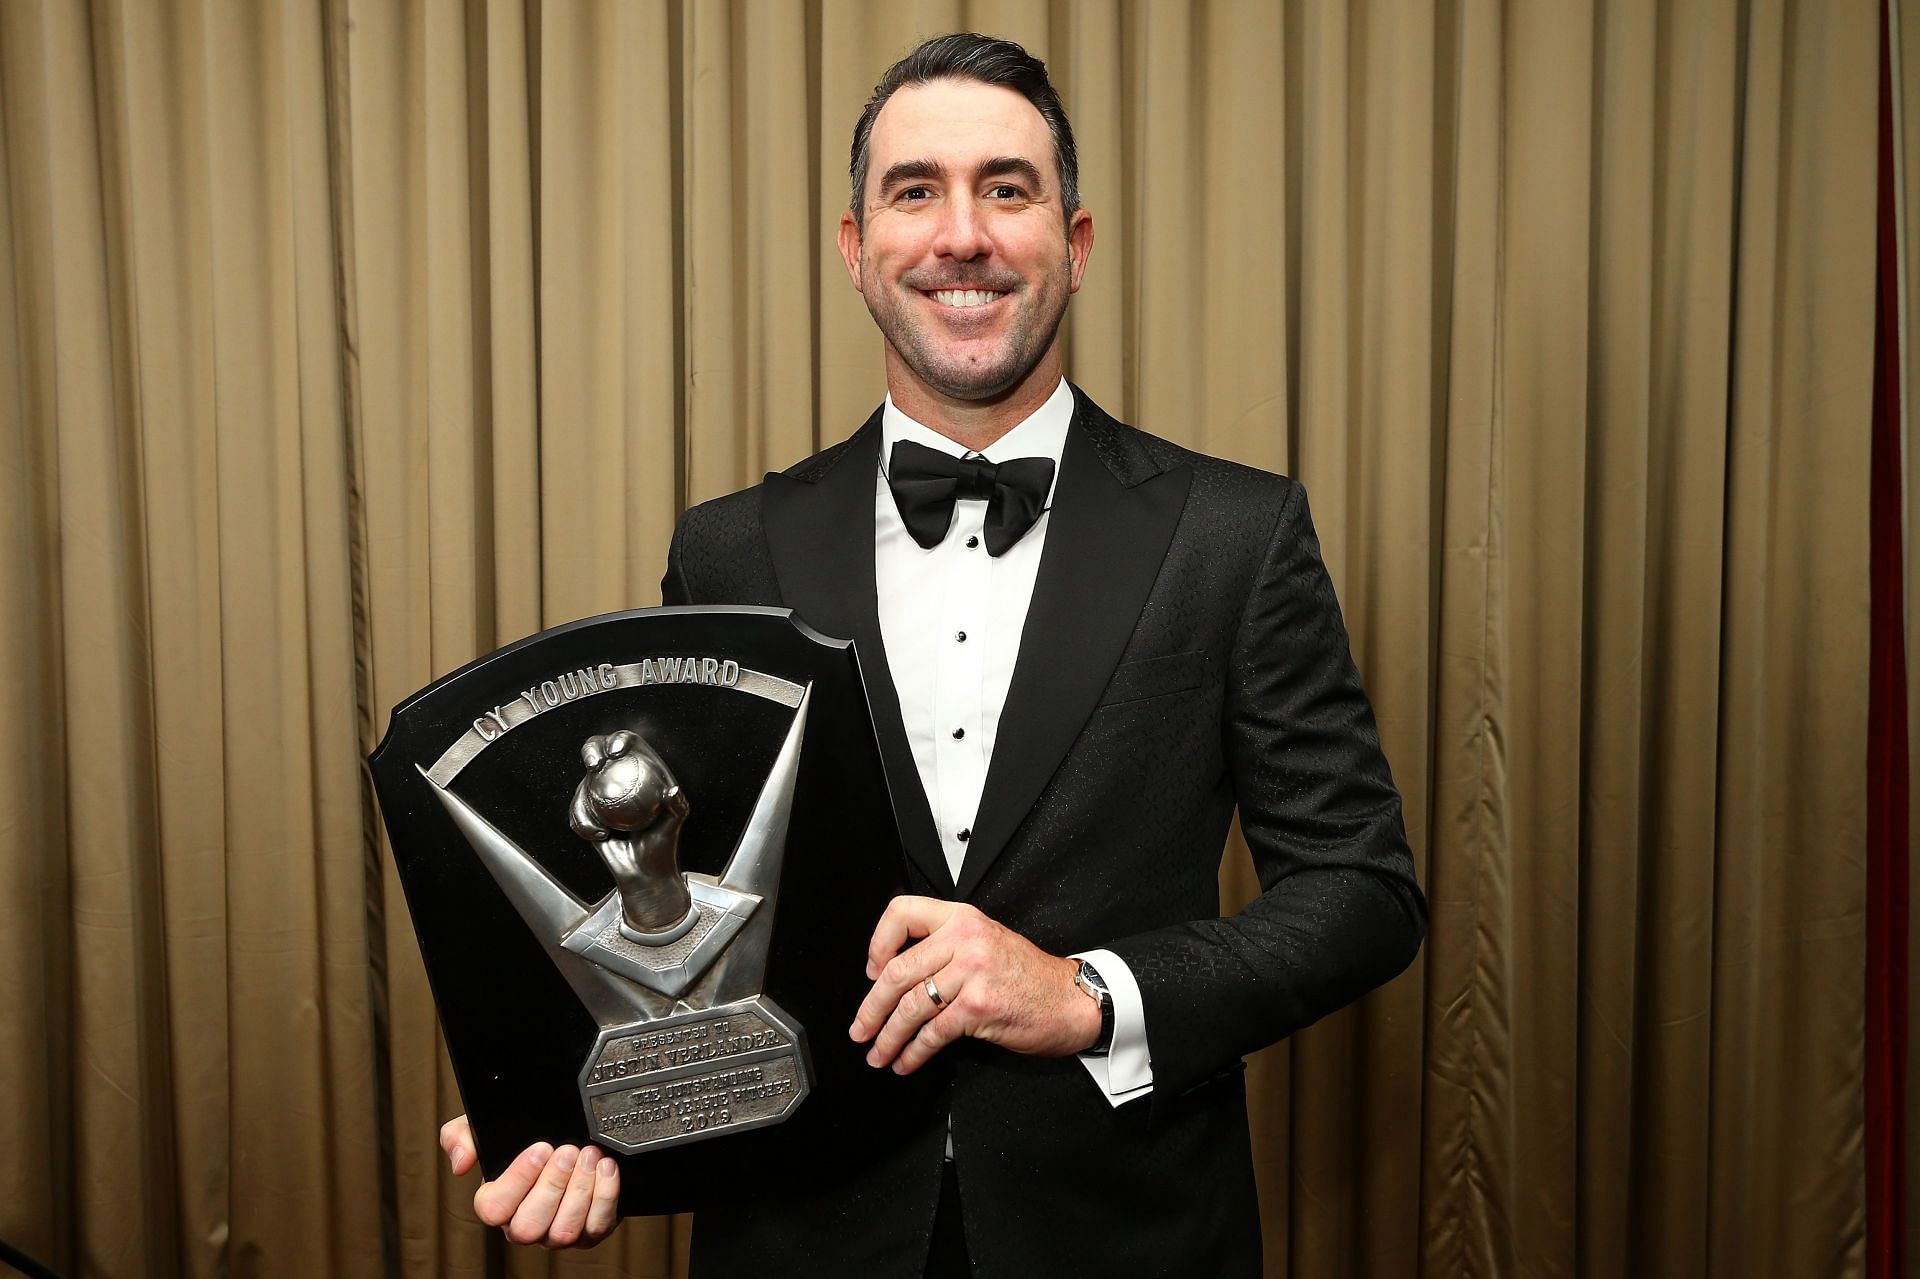 The MLB&#039;s Cy Young Award, which Justin Verlander has won four times, is awarded to each league&#039;s finest pitcher